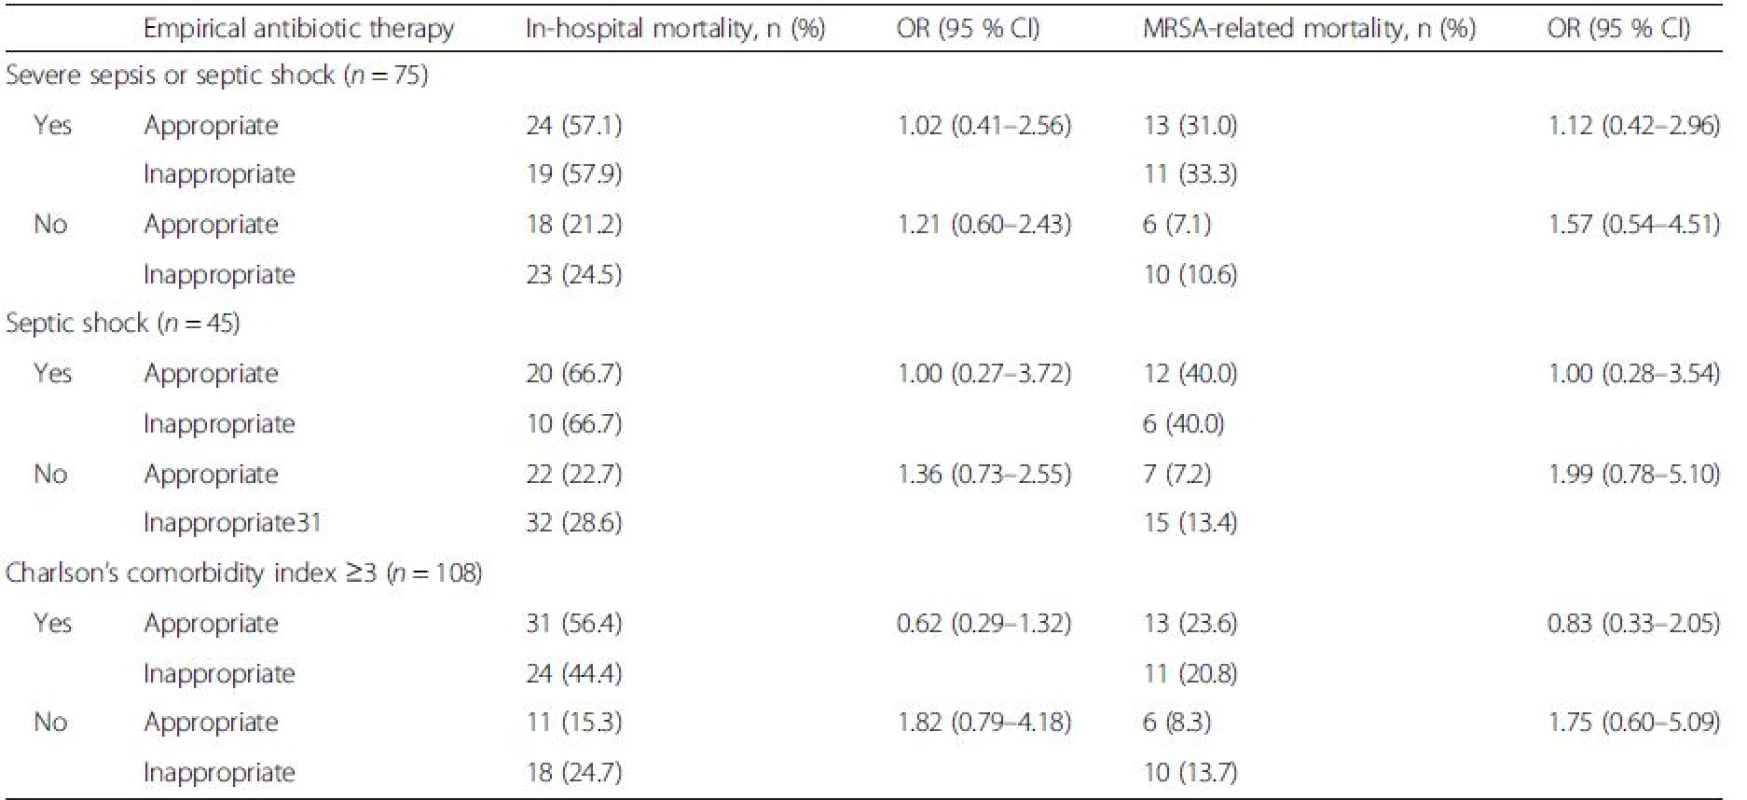 Comparison of in-hospital mortality rates according to the clinical severity of healthcare-associated methicillin-resistant <i>Staphylococcus aureus</i> bacteremia in the propensity-matched analyses